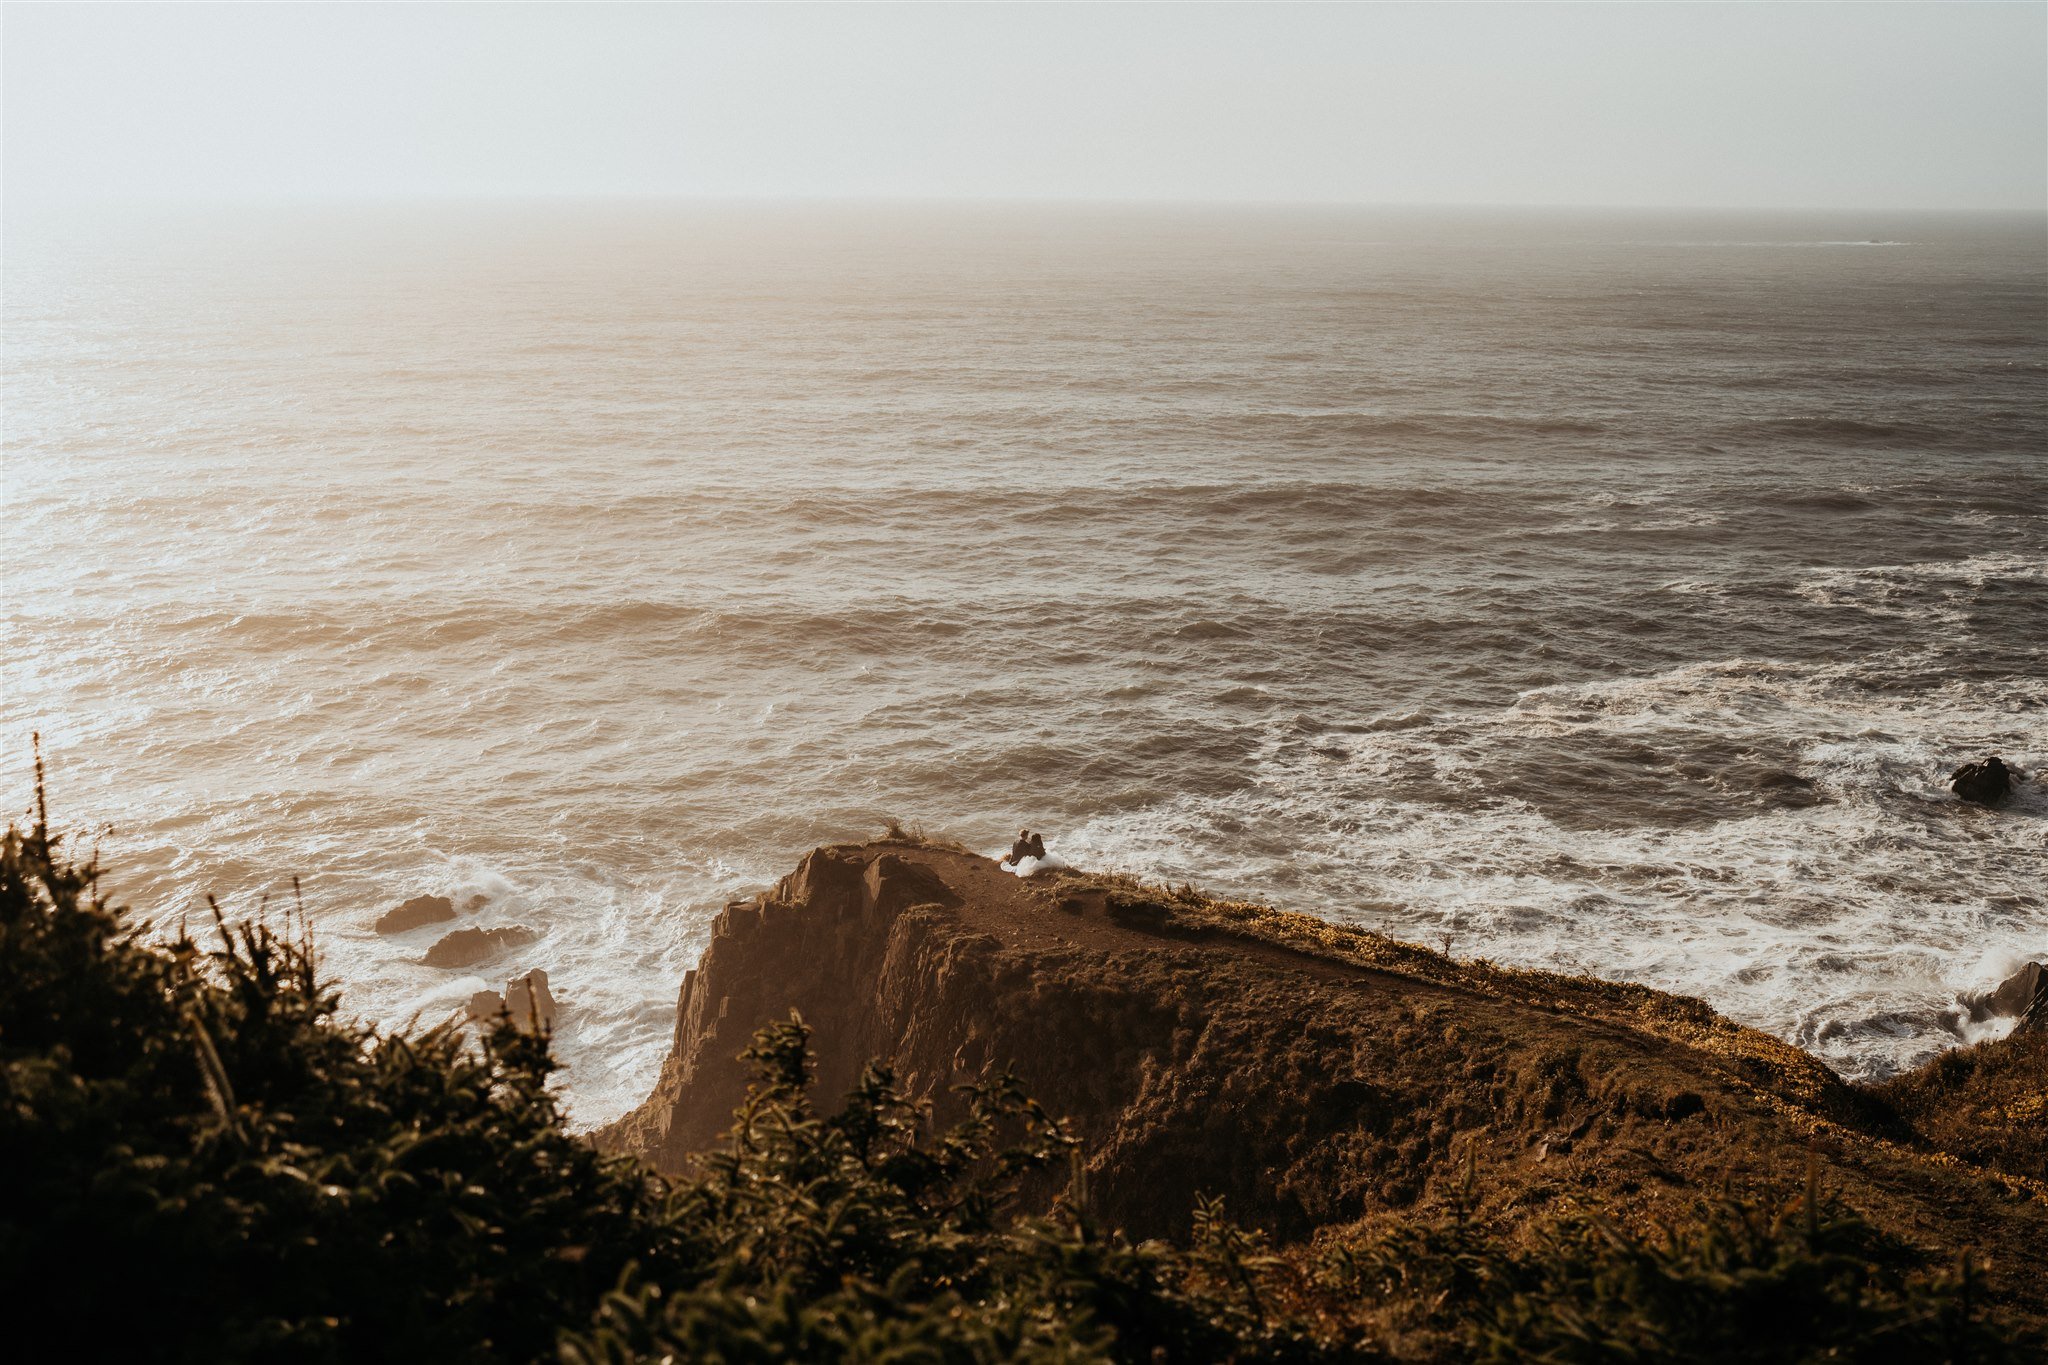 Two brides walking on a trail at sunset on the Oregon cliffs